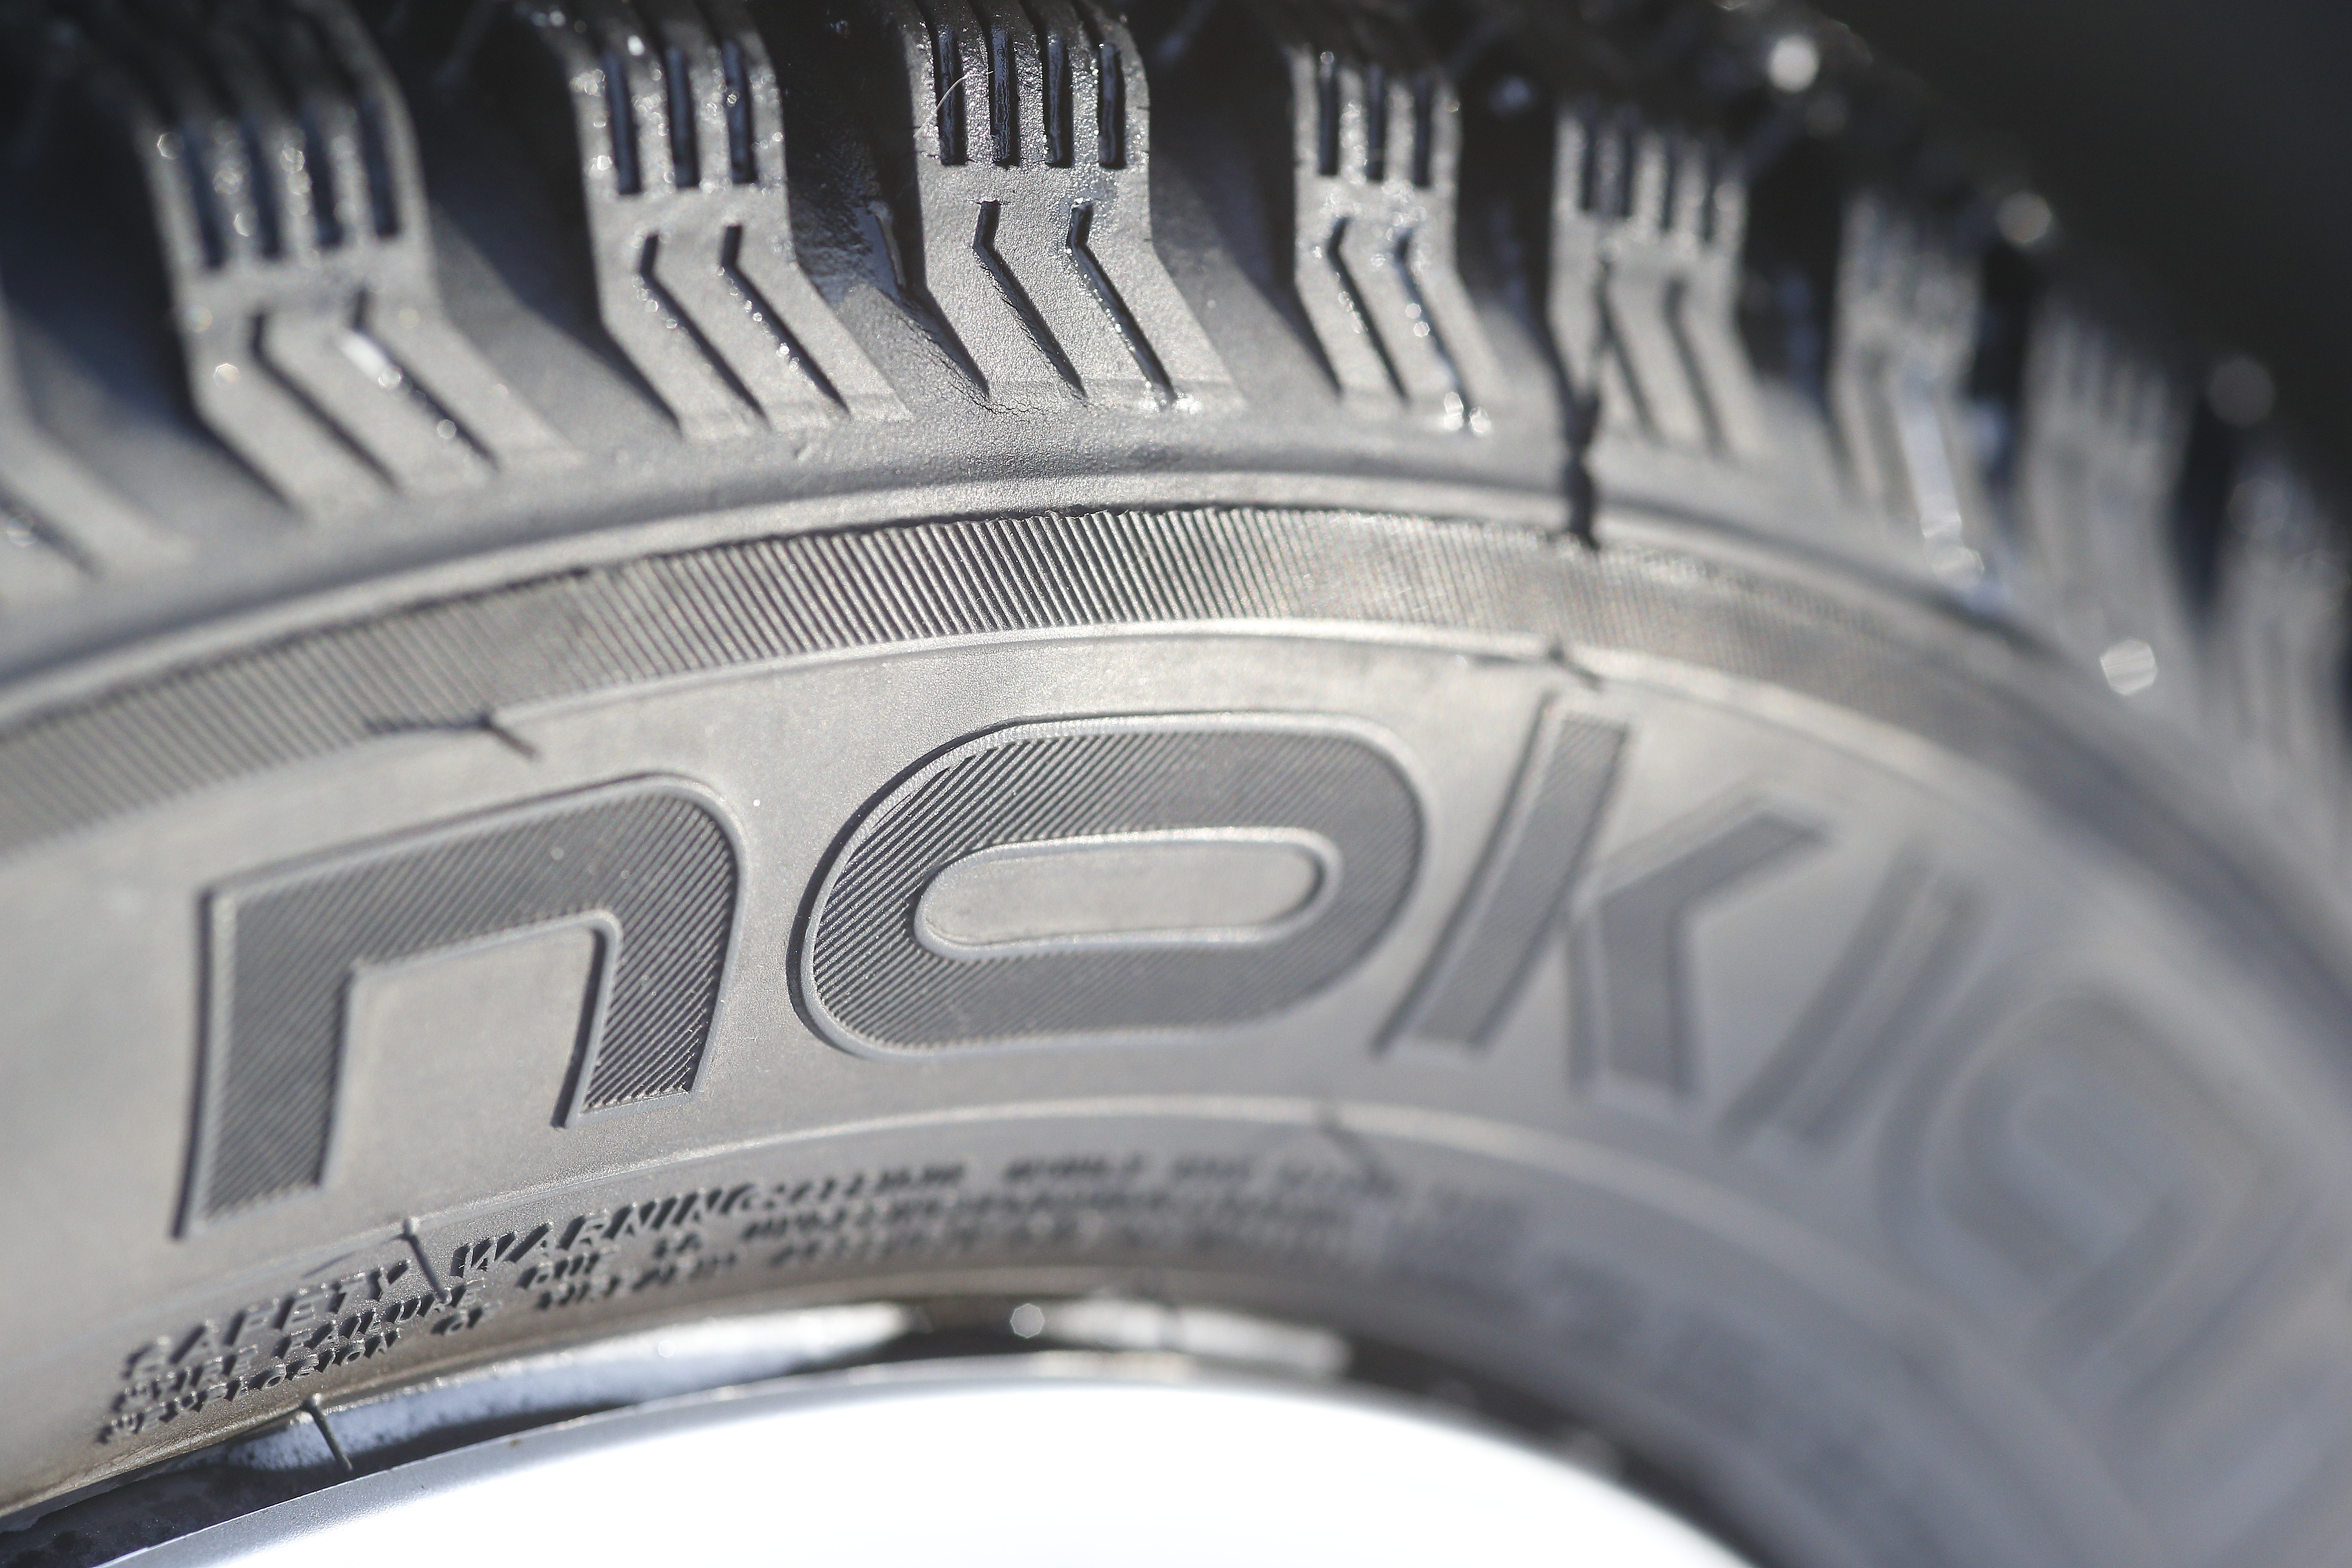 Nokian Tires: Streamlining production in Finland and the USA, but staying in Russia